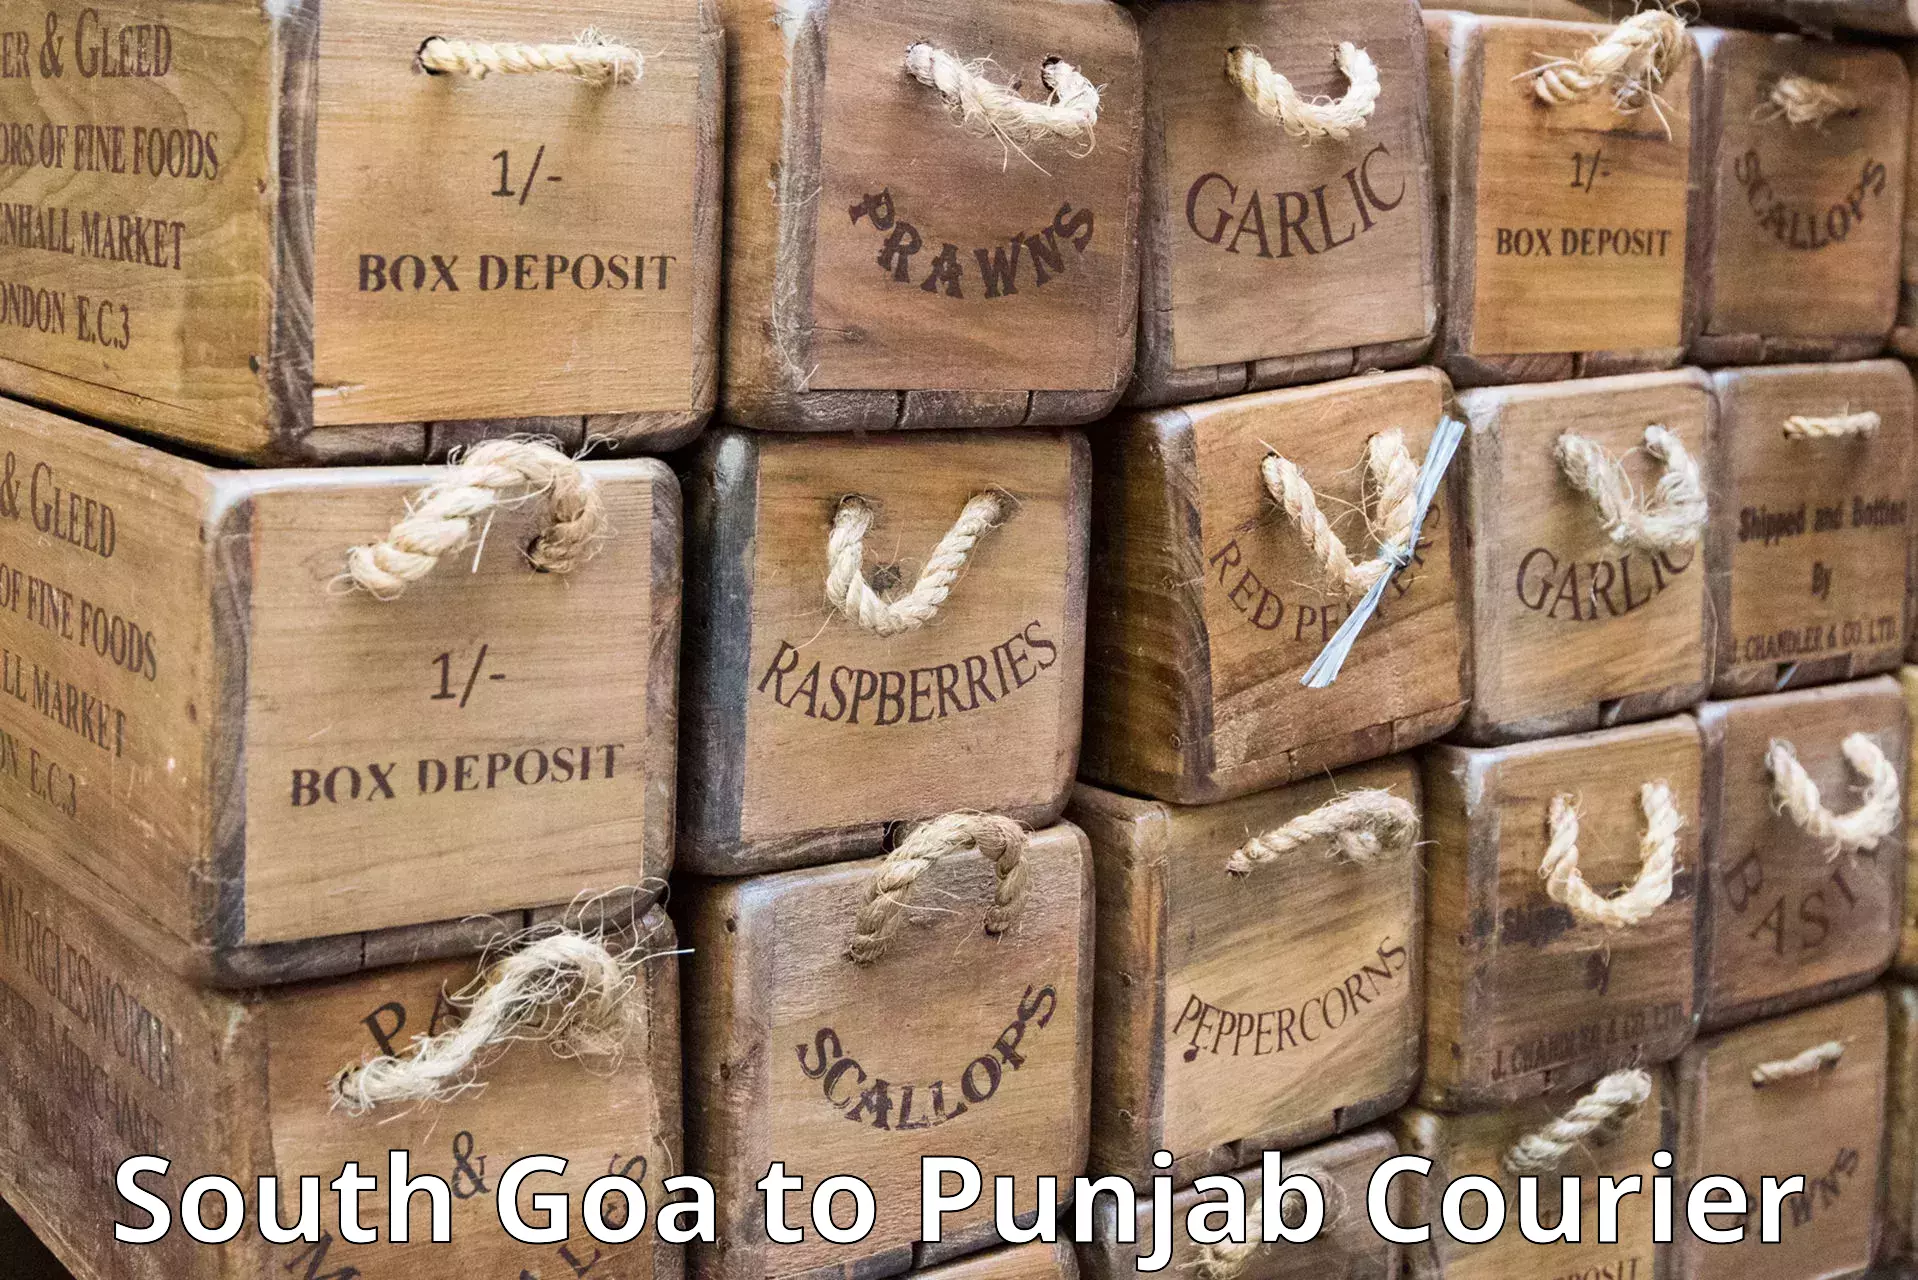 Shipping and handling in South Goa to Punjab